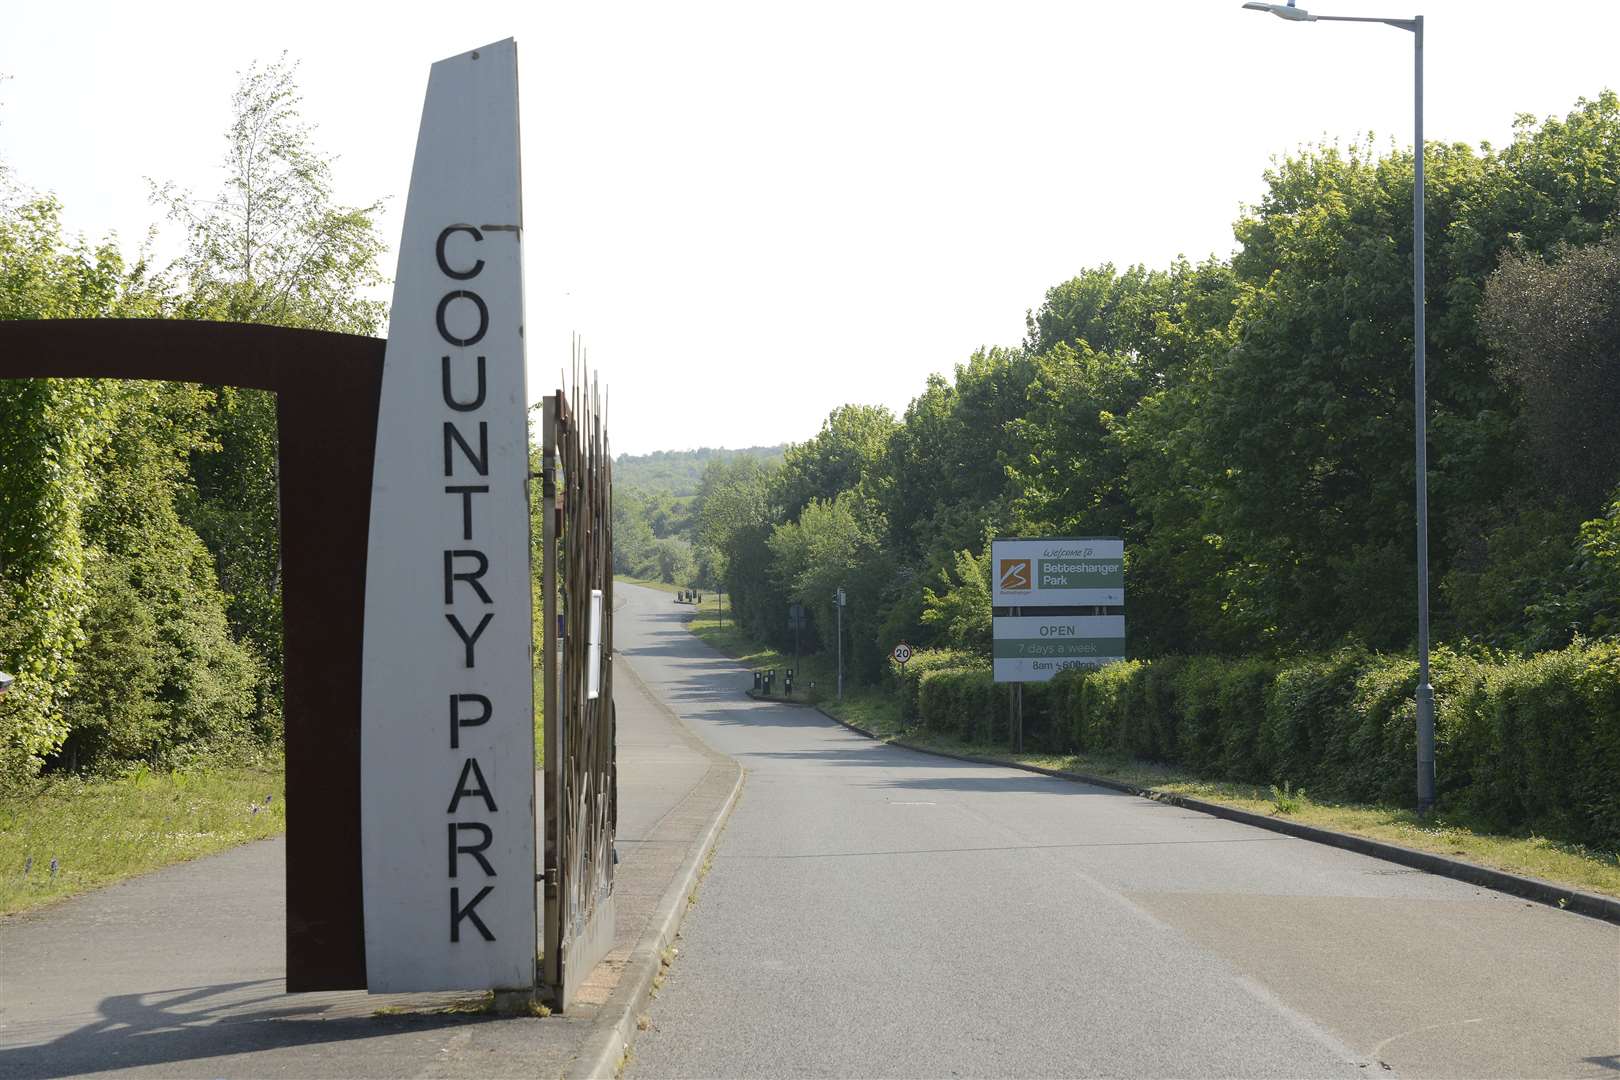 Betteshanger Country Park is opening its front gates again after being closed for more than two months